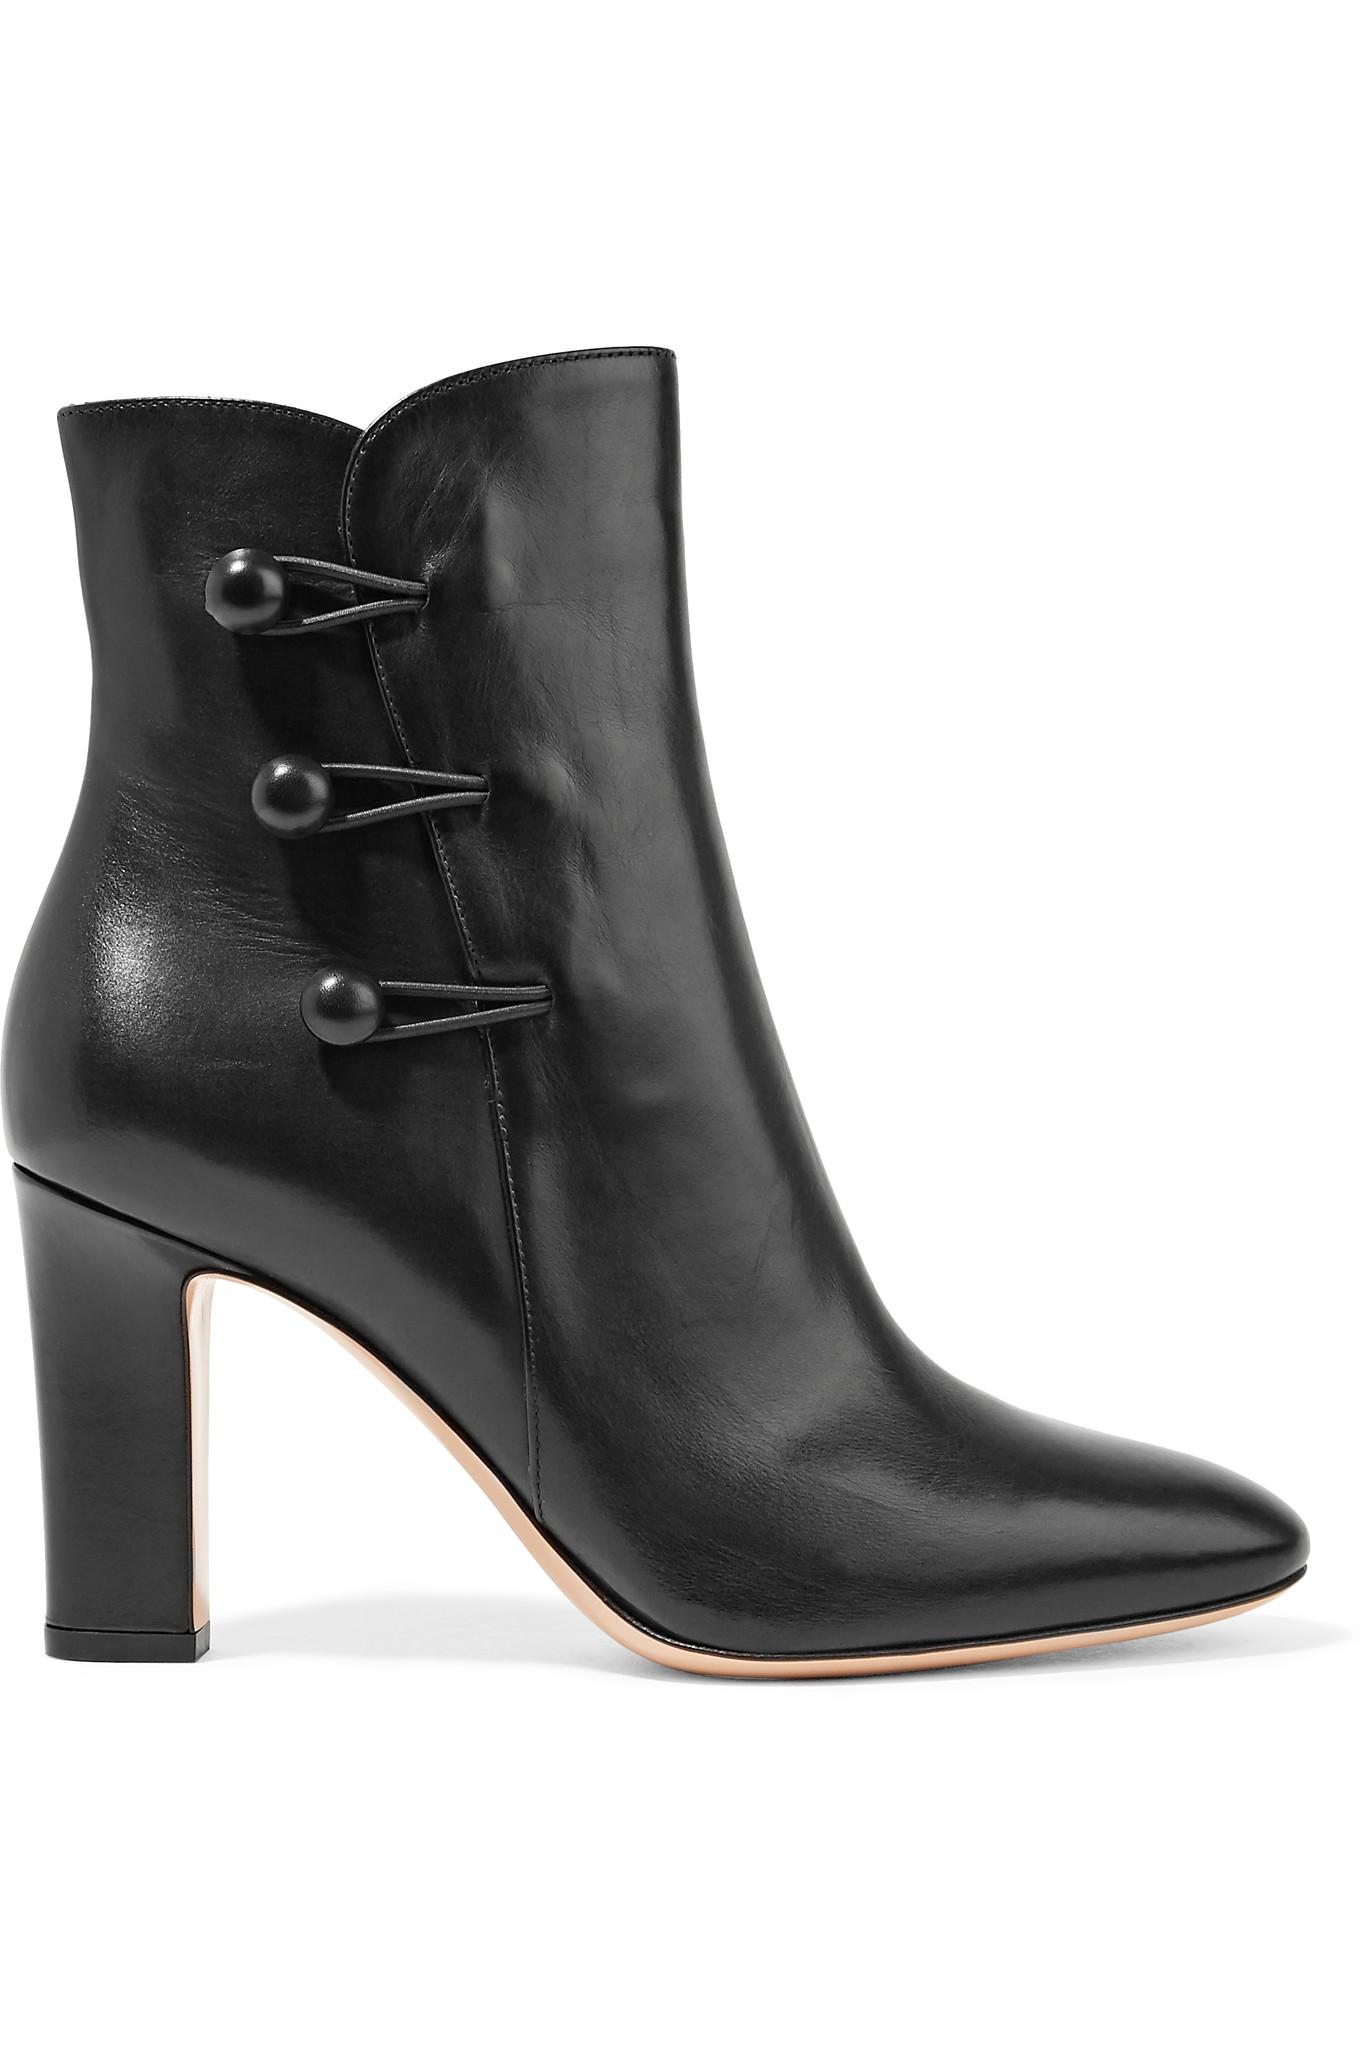 Gianvito Rossi Leather Ankle Boots in Black - Lyst